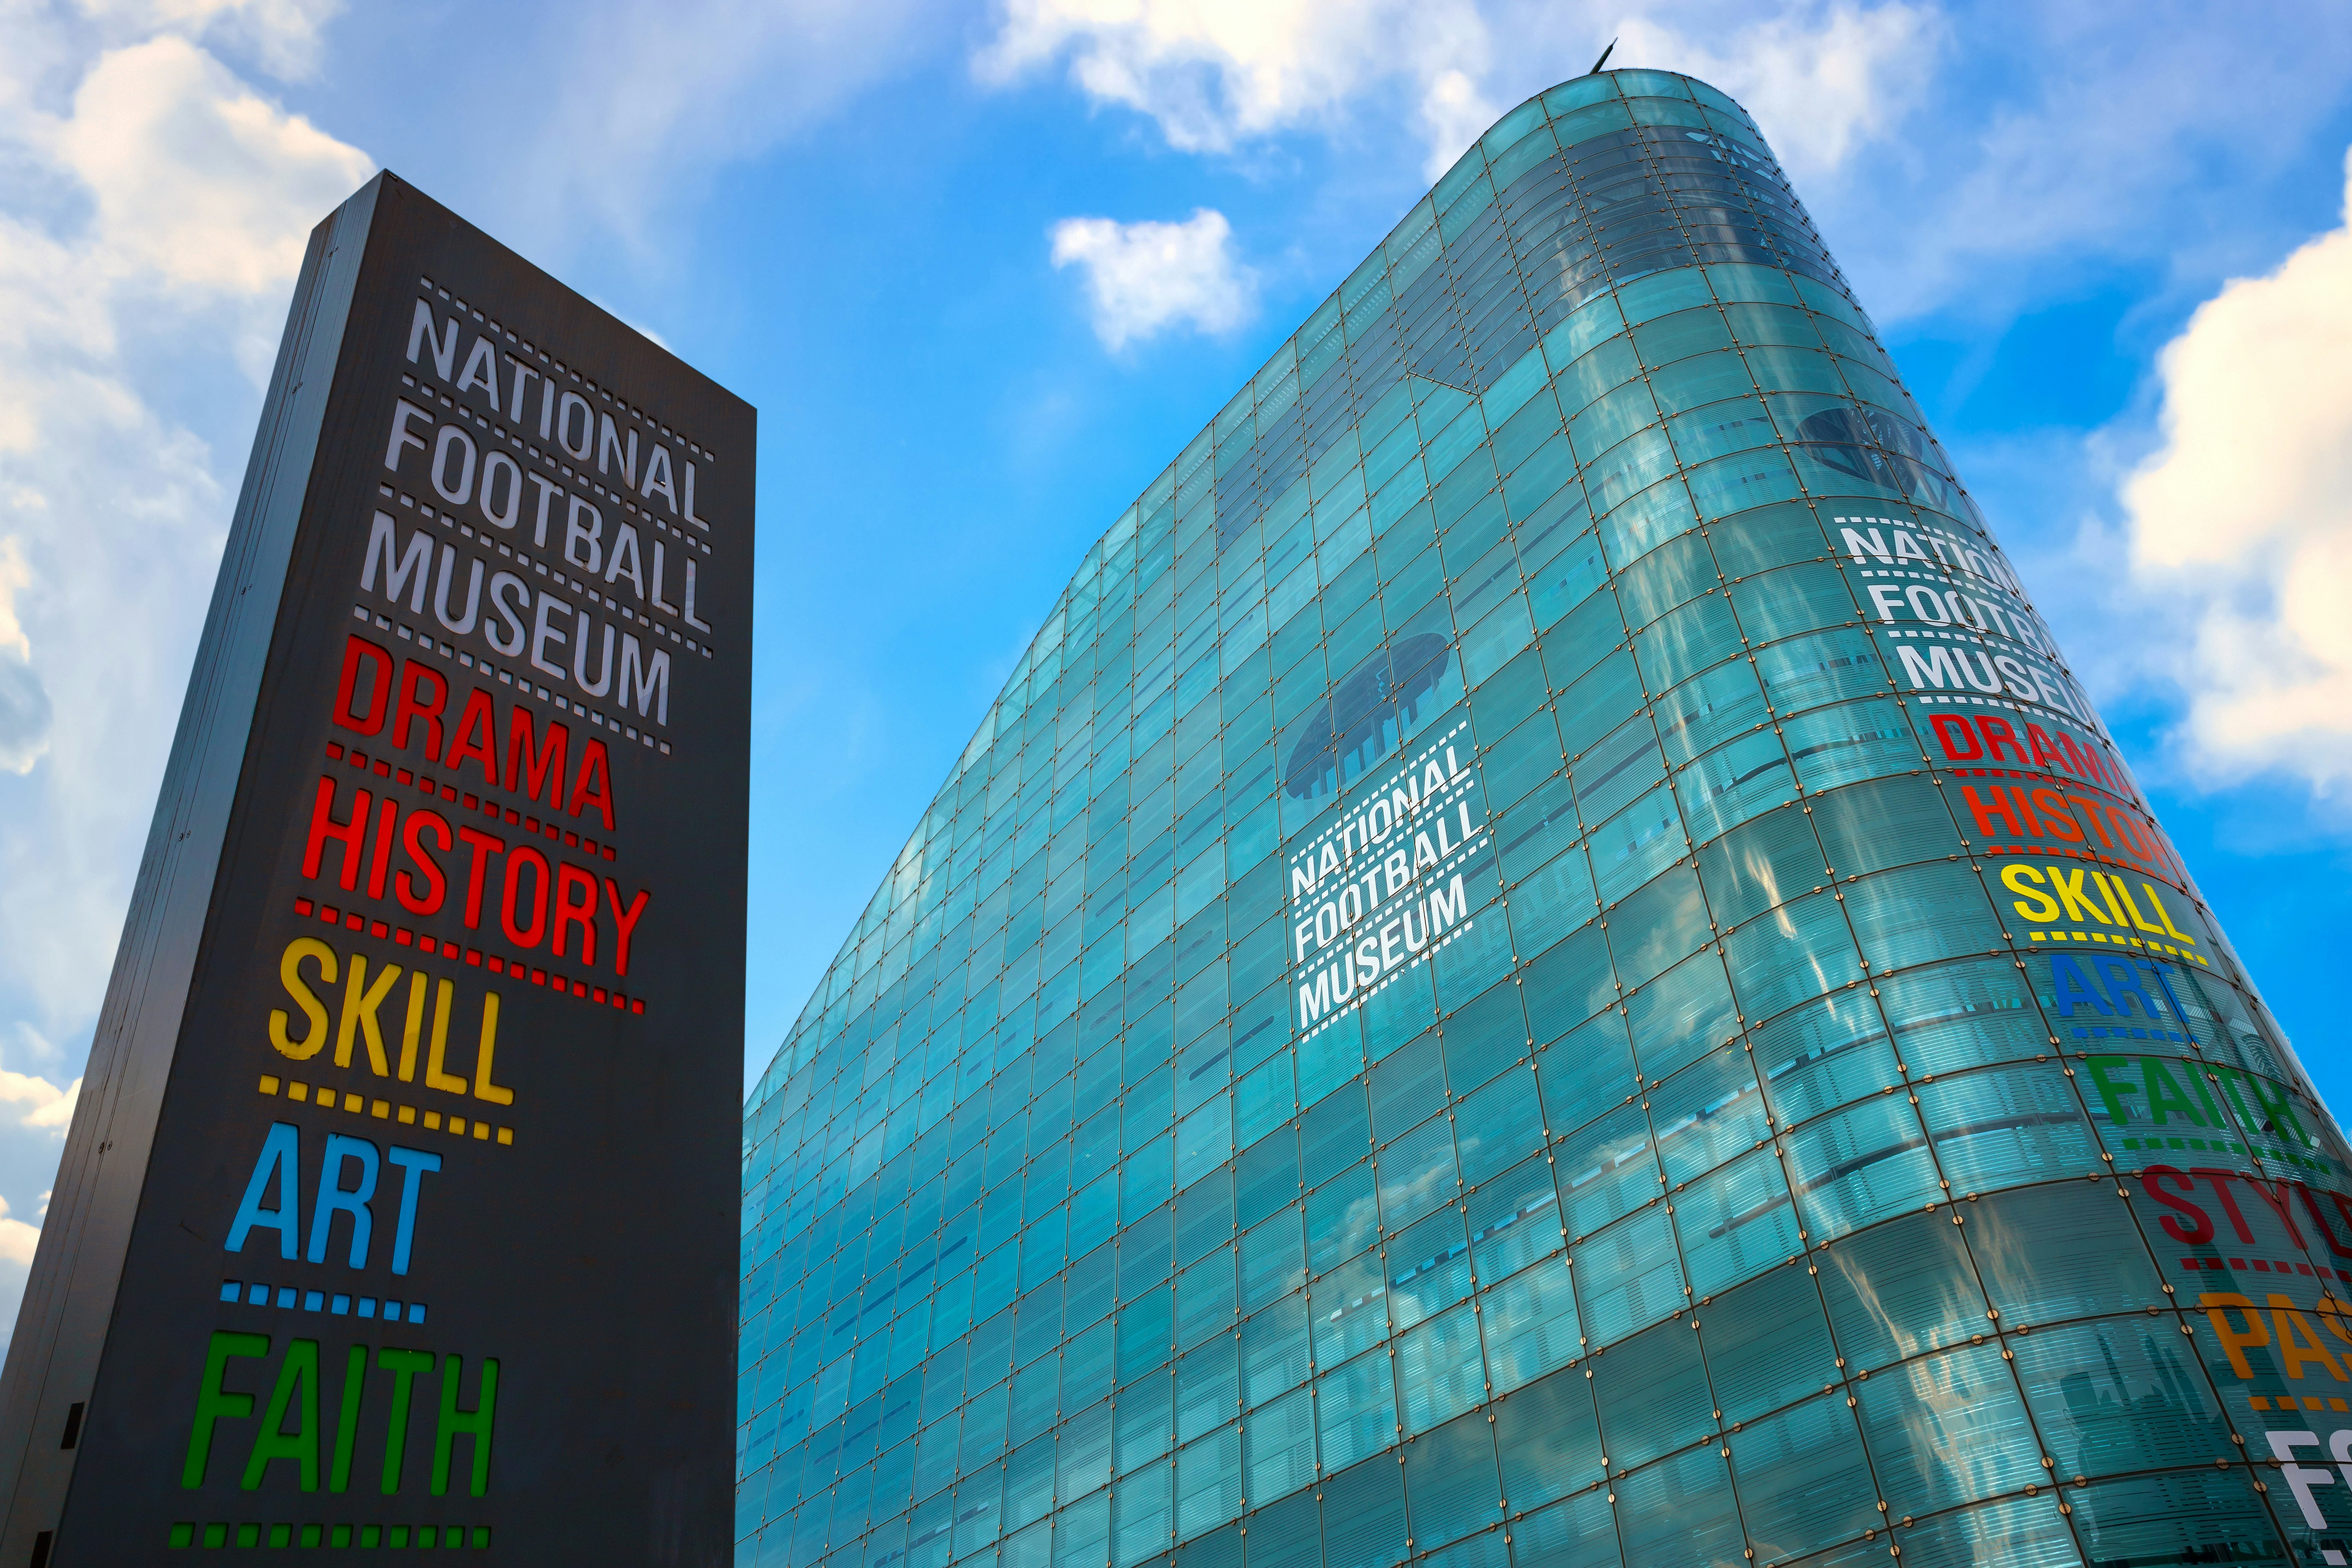 A tall curved glass building with a large sign outside it. The colorful writing says "National Football Museum: Drama, History, Art, Skill, Faith